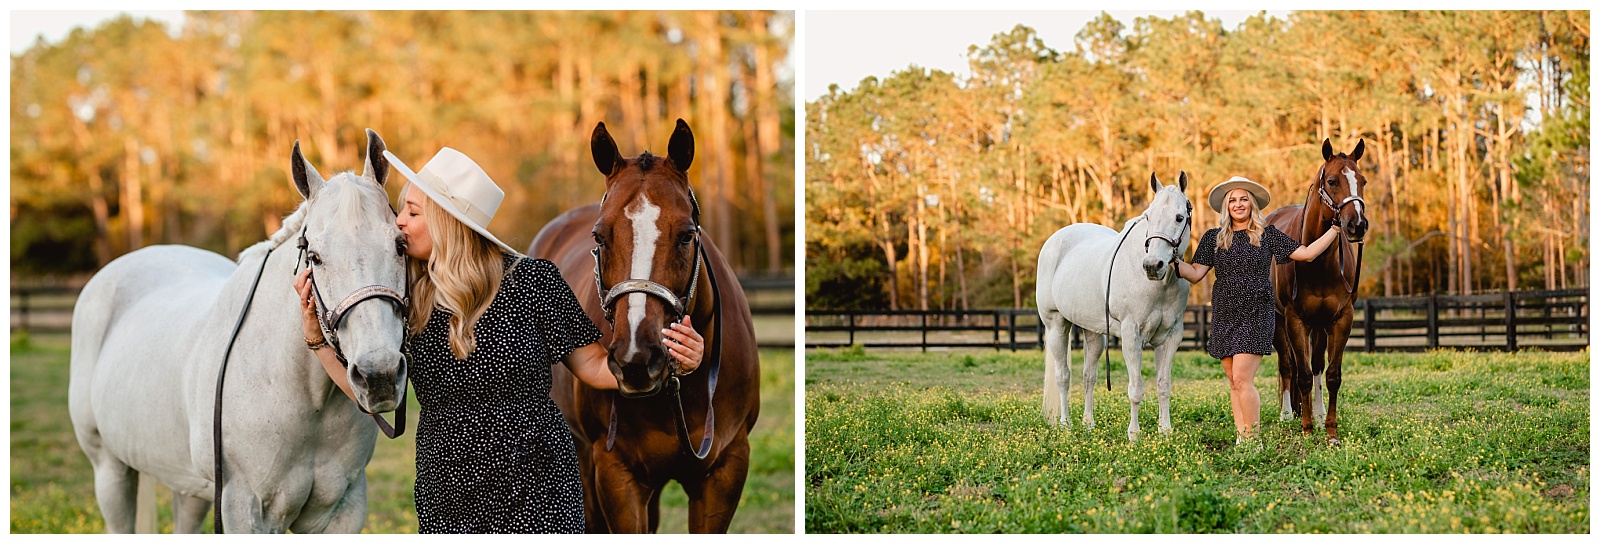 Girl and her old horse and new horse. Horse and rider photographer near Tampa.